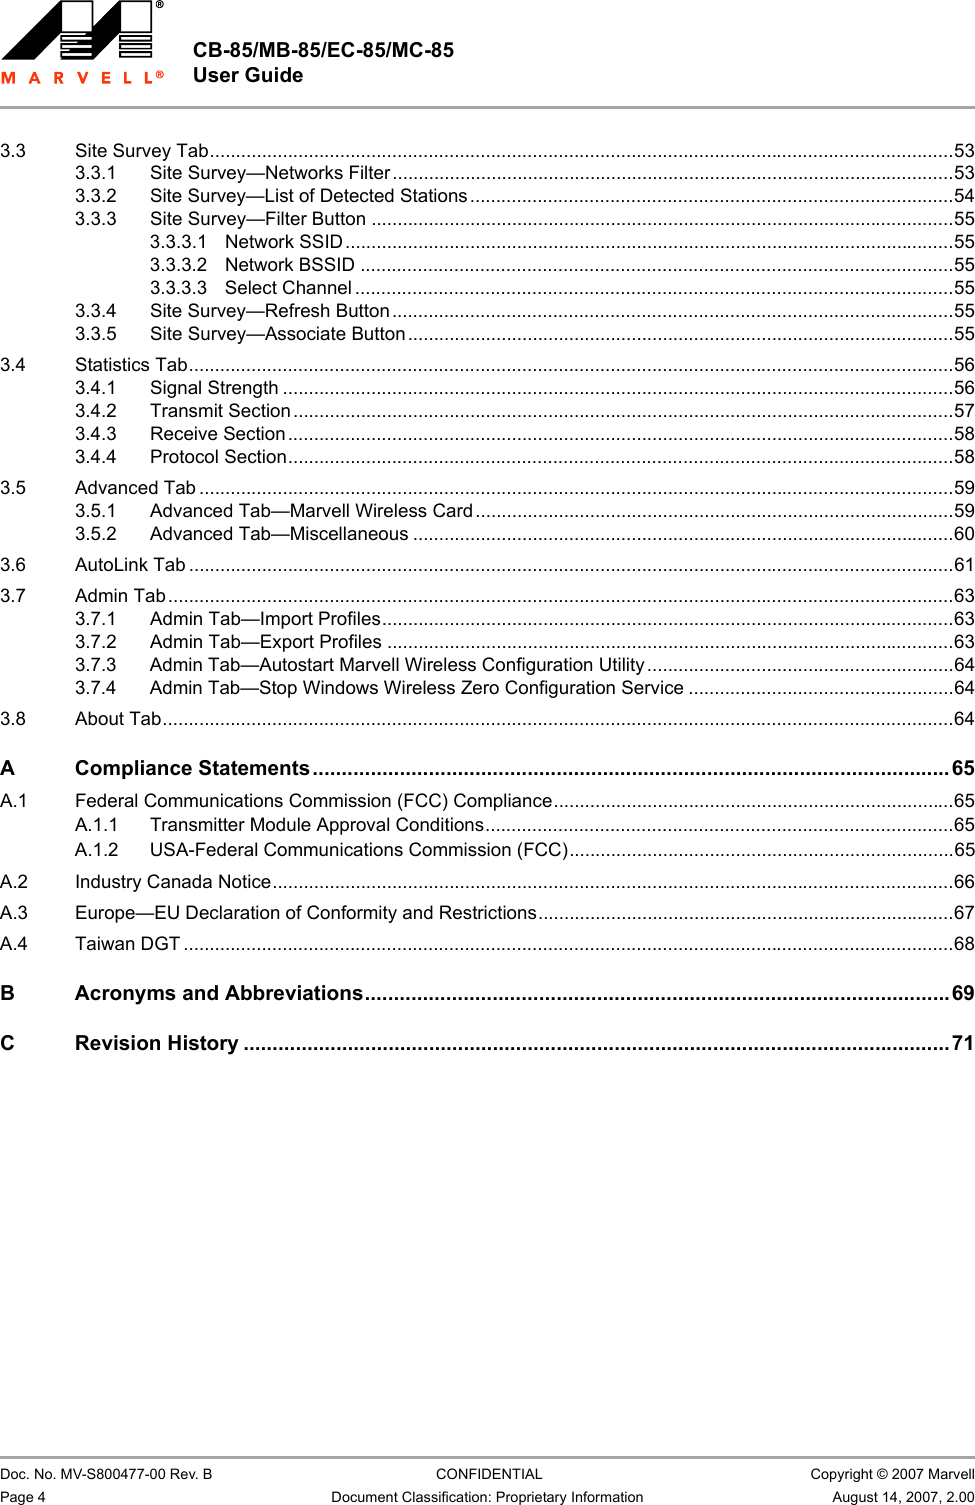 CB-85/MB-85/EC-85/MC-85 User Guide                                                  Doc. No. MV-S800477-00 Rev. B  CONFIDENTIAL  Copyright © 2007 MarvellPage 4 Document Classification: Proprietary Information August 14, 2007, 2.00 3.3 Site Survey Tab...............................................................................................................................................533.3.1 Site Survey—Networks Filter............................................................................................................533.3.2 Site Survey—List of Detected Stations.............................................................................................543.3.3 Site Survey—Filter Button ................................................................................................................553.3.3.1 Network SSID.....................................................................................................................553.3.3.2 Network BSSID ..................................................................................................................553.3.3.3 Select Channel ...................................................................................................................553.3.4 Site Survey—Refresh Button............................................................................................................553.3.5 Site Survey—Associate Button .........................................................................................................553.4 Statistics Tab...................................................................................................................................................563.4.1 Signal Strength .................................................................................................................................563.4.2 Transmit Section...............................................................................................................................573.4.3 Receive Section................................................................................................................................583.4.4 Protocol Section................................................................................................................................583.5 Advanced Tab .................................................................................................................................................593.5.1 Advanced Tab—Marvell Wireless Card............................................................................................593.5.2 Advanced Tab—Miscellaneous ........................................................................................................603.6 AutoLink Tab ...................................................................................................................................................613.7 Admin Tab.......................................................................................................................................................633.7.1 Admin Tab—Import Profiles..............................................................................................................633.7.2 Admin Tab—Export Profiles .............................................................................................................633.7.3 Admin Tab—Autostart Marvell Wireless Configuration Utility...........................................................643.7.4 Admin Tab—Stop Windows Wireless Zero Configuration Service ...................................................643.8 About Tab........................................................................................................................................................64A Compliance Statements..............................................................................................................65A.1 Federal Communications Commission (FCC) Compliance.............................................................................65A.1.1 Transmitter Module Approval Conditions..........................................................................................65A.1.2 USA-Federal Communications Commission (FCC)..........................................................................65A.2 Industry Canada Notice...................................................................................................................................66A.3 Europe—EU Declaration of Conformity and Restrictions................................................................................67A.4 Taiwan DGT ....................................................................................................................................................68B Acronyms and Abbreviations.....................................................................................................69C Revision History ..........................................................................................................................71